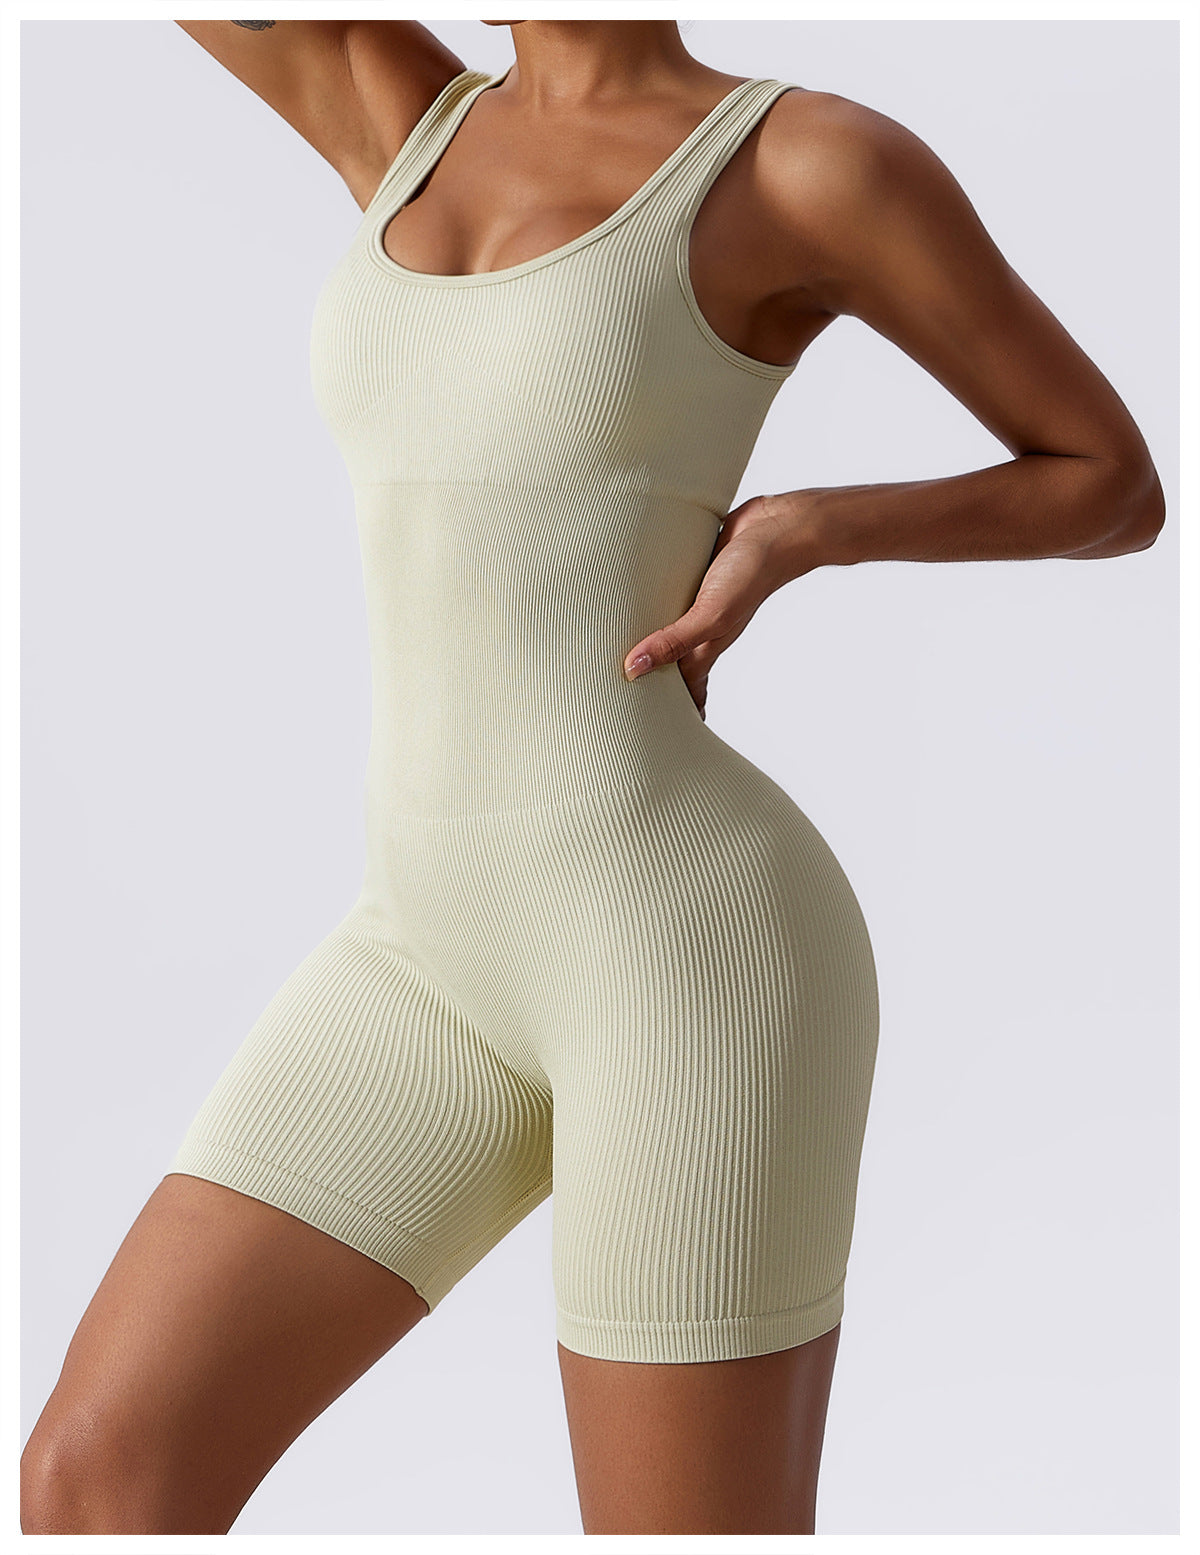 Seamless one-piece yoga suit women's high-elastic one-piece tight-fitting one-piece suit in the air beautiful back yoga suit 6982